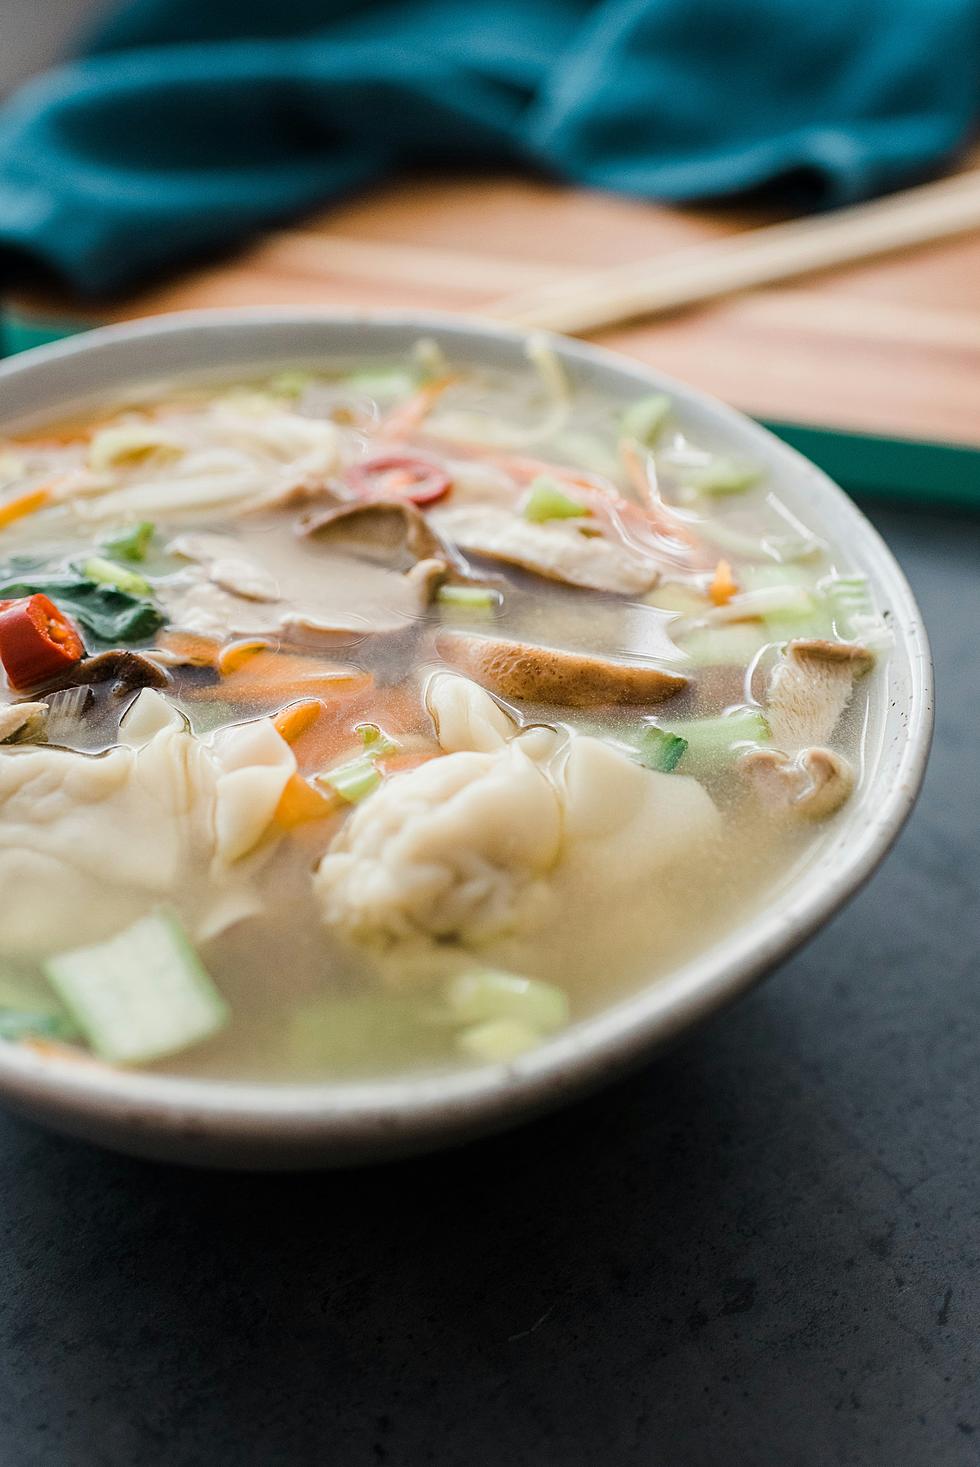 It’s a Taste of Heaven! Where To Find The Best Soup In New Jersey